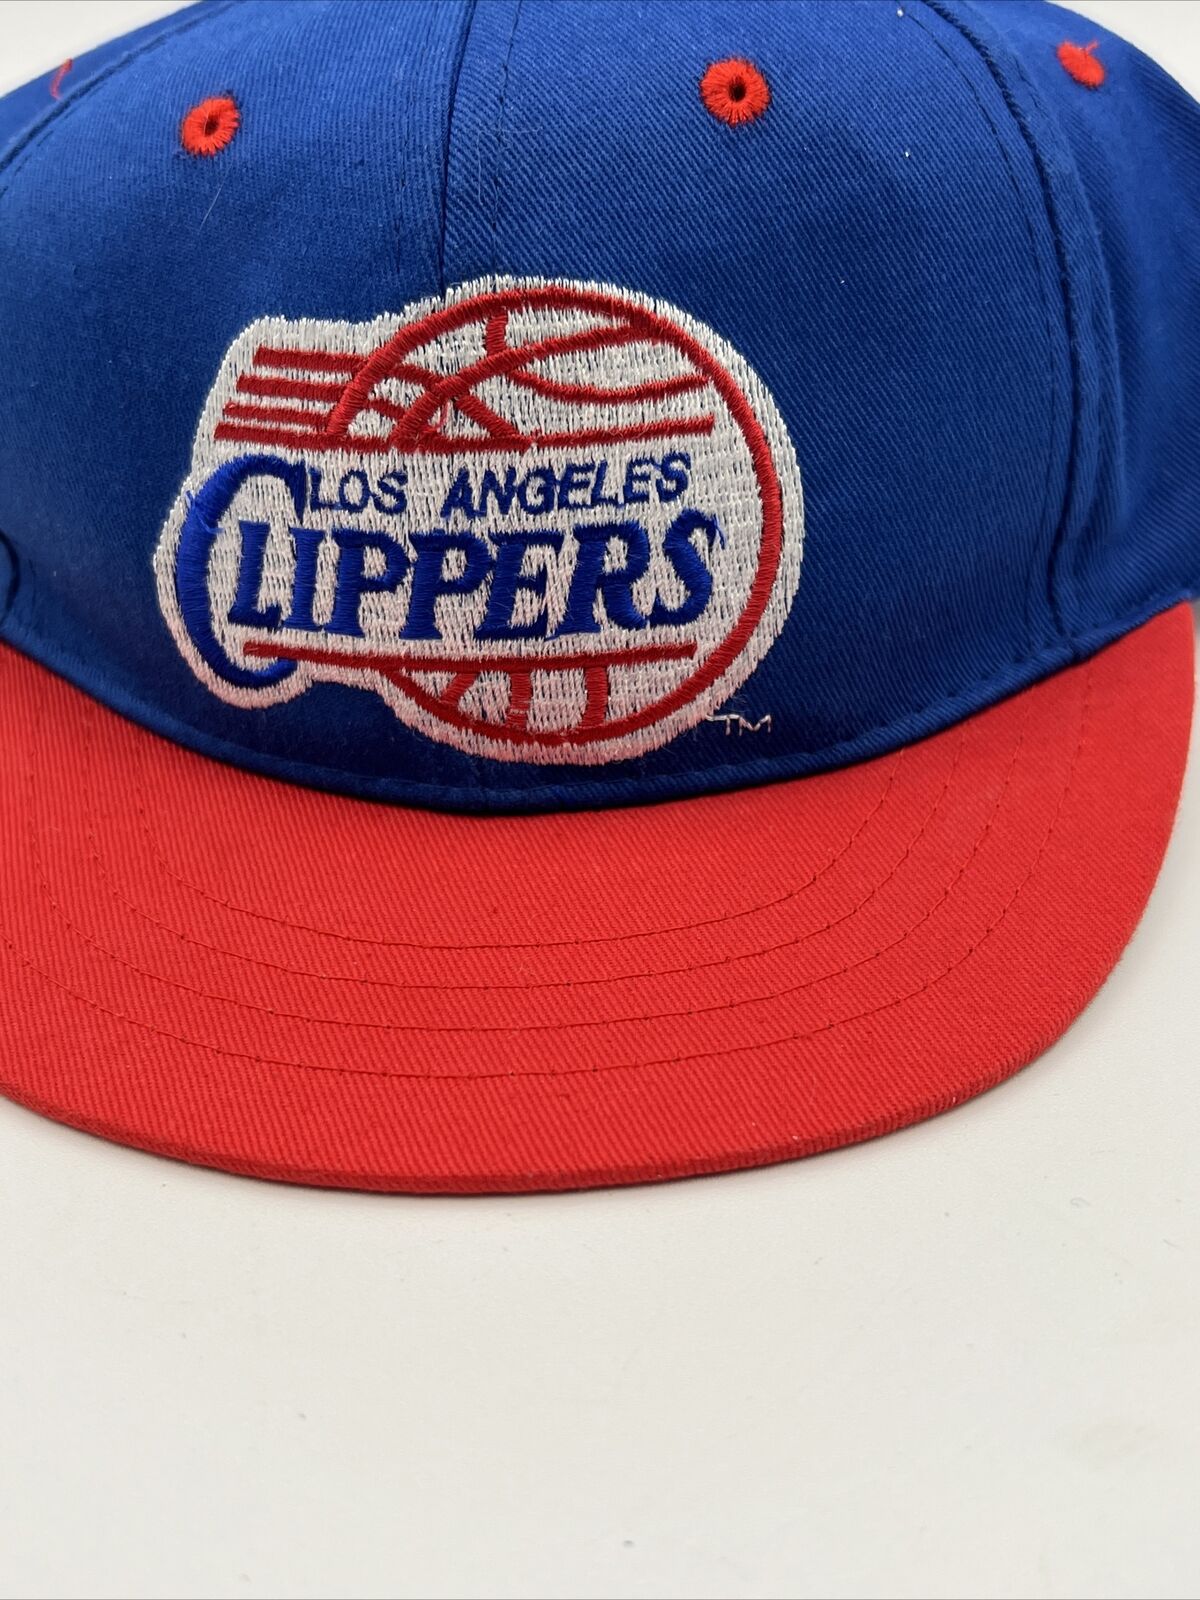 Vintage Los Angeles Clippers Official NBA Product Snapback Hat Blue Juvenile